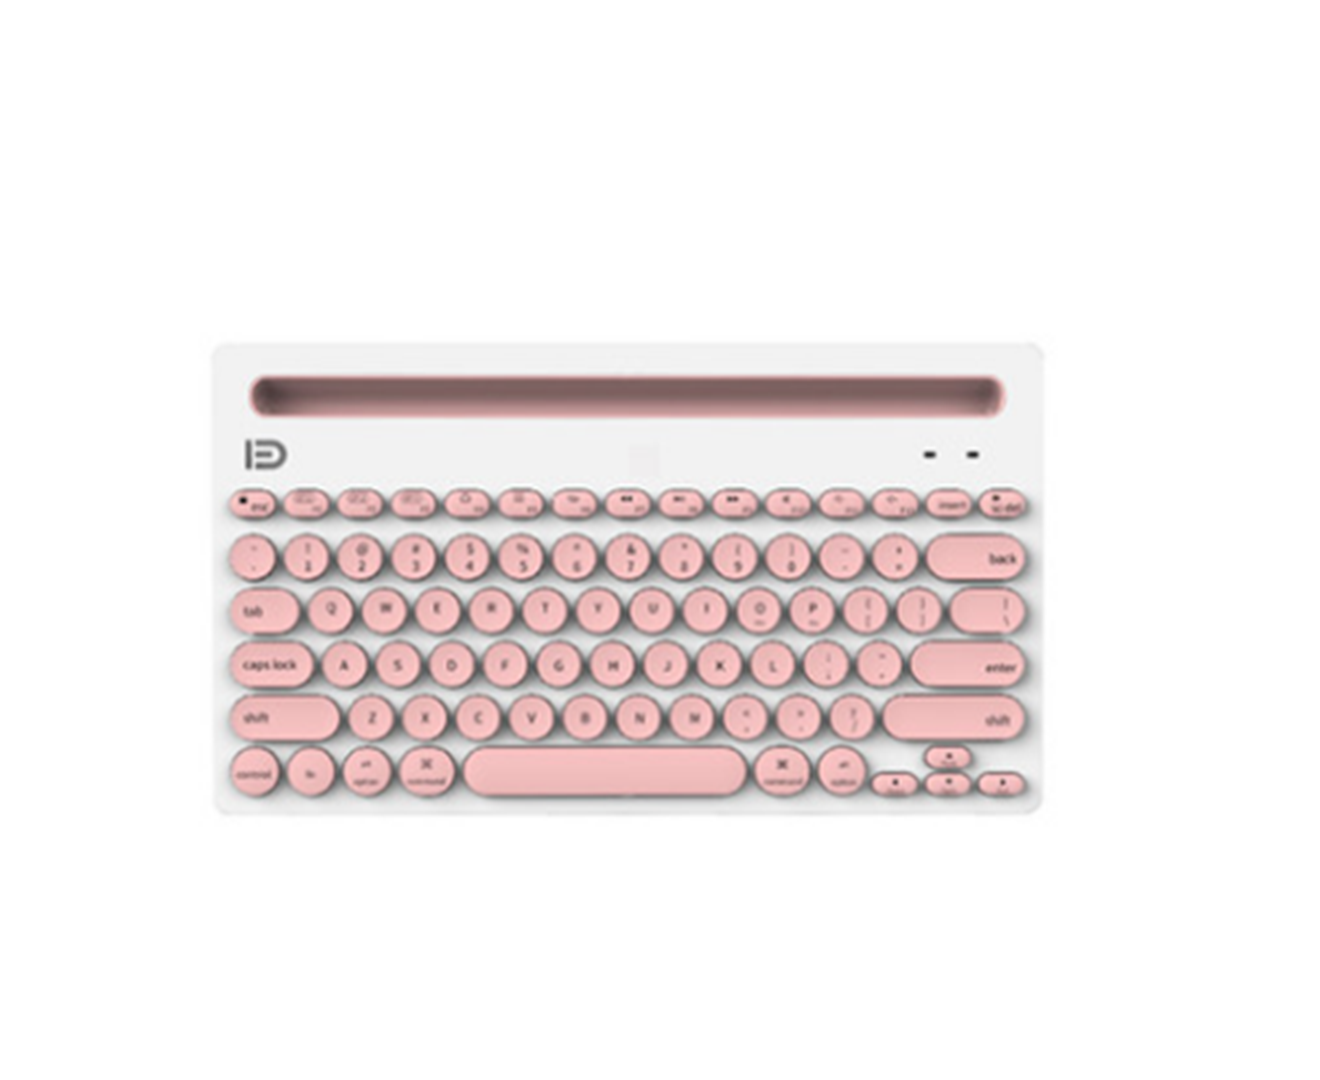 Bluetooth Keyboard Multi-Device Universal Bluetooth with Integrated Stand for iPad PC MacBook Android iOS Windows-Pink